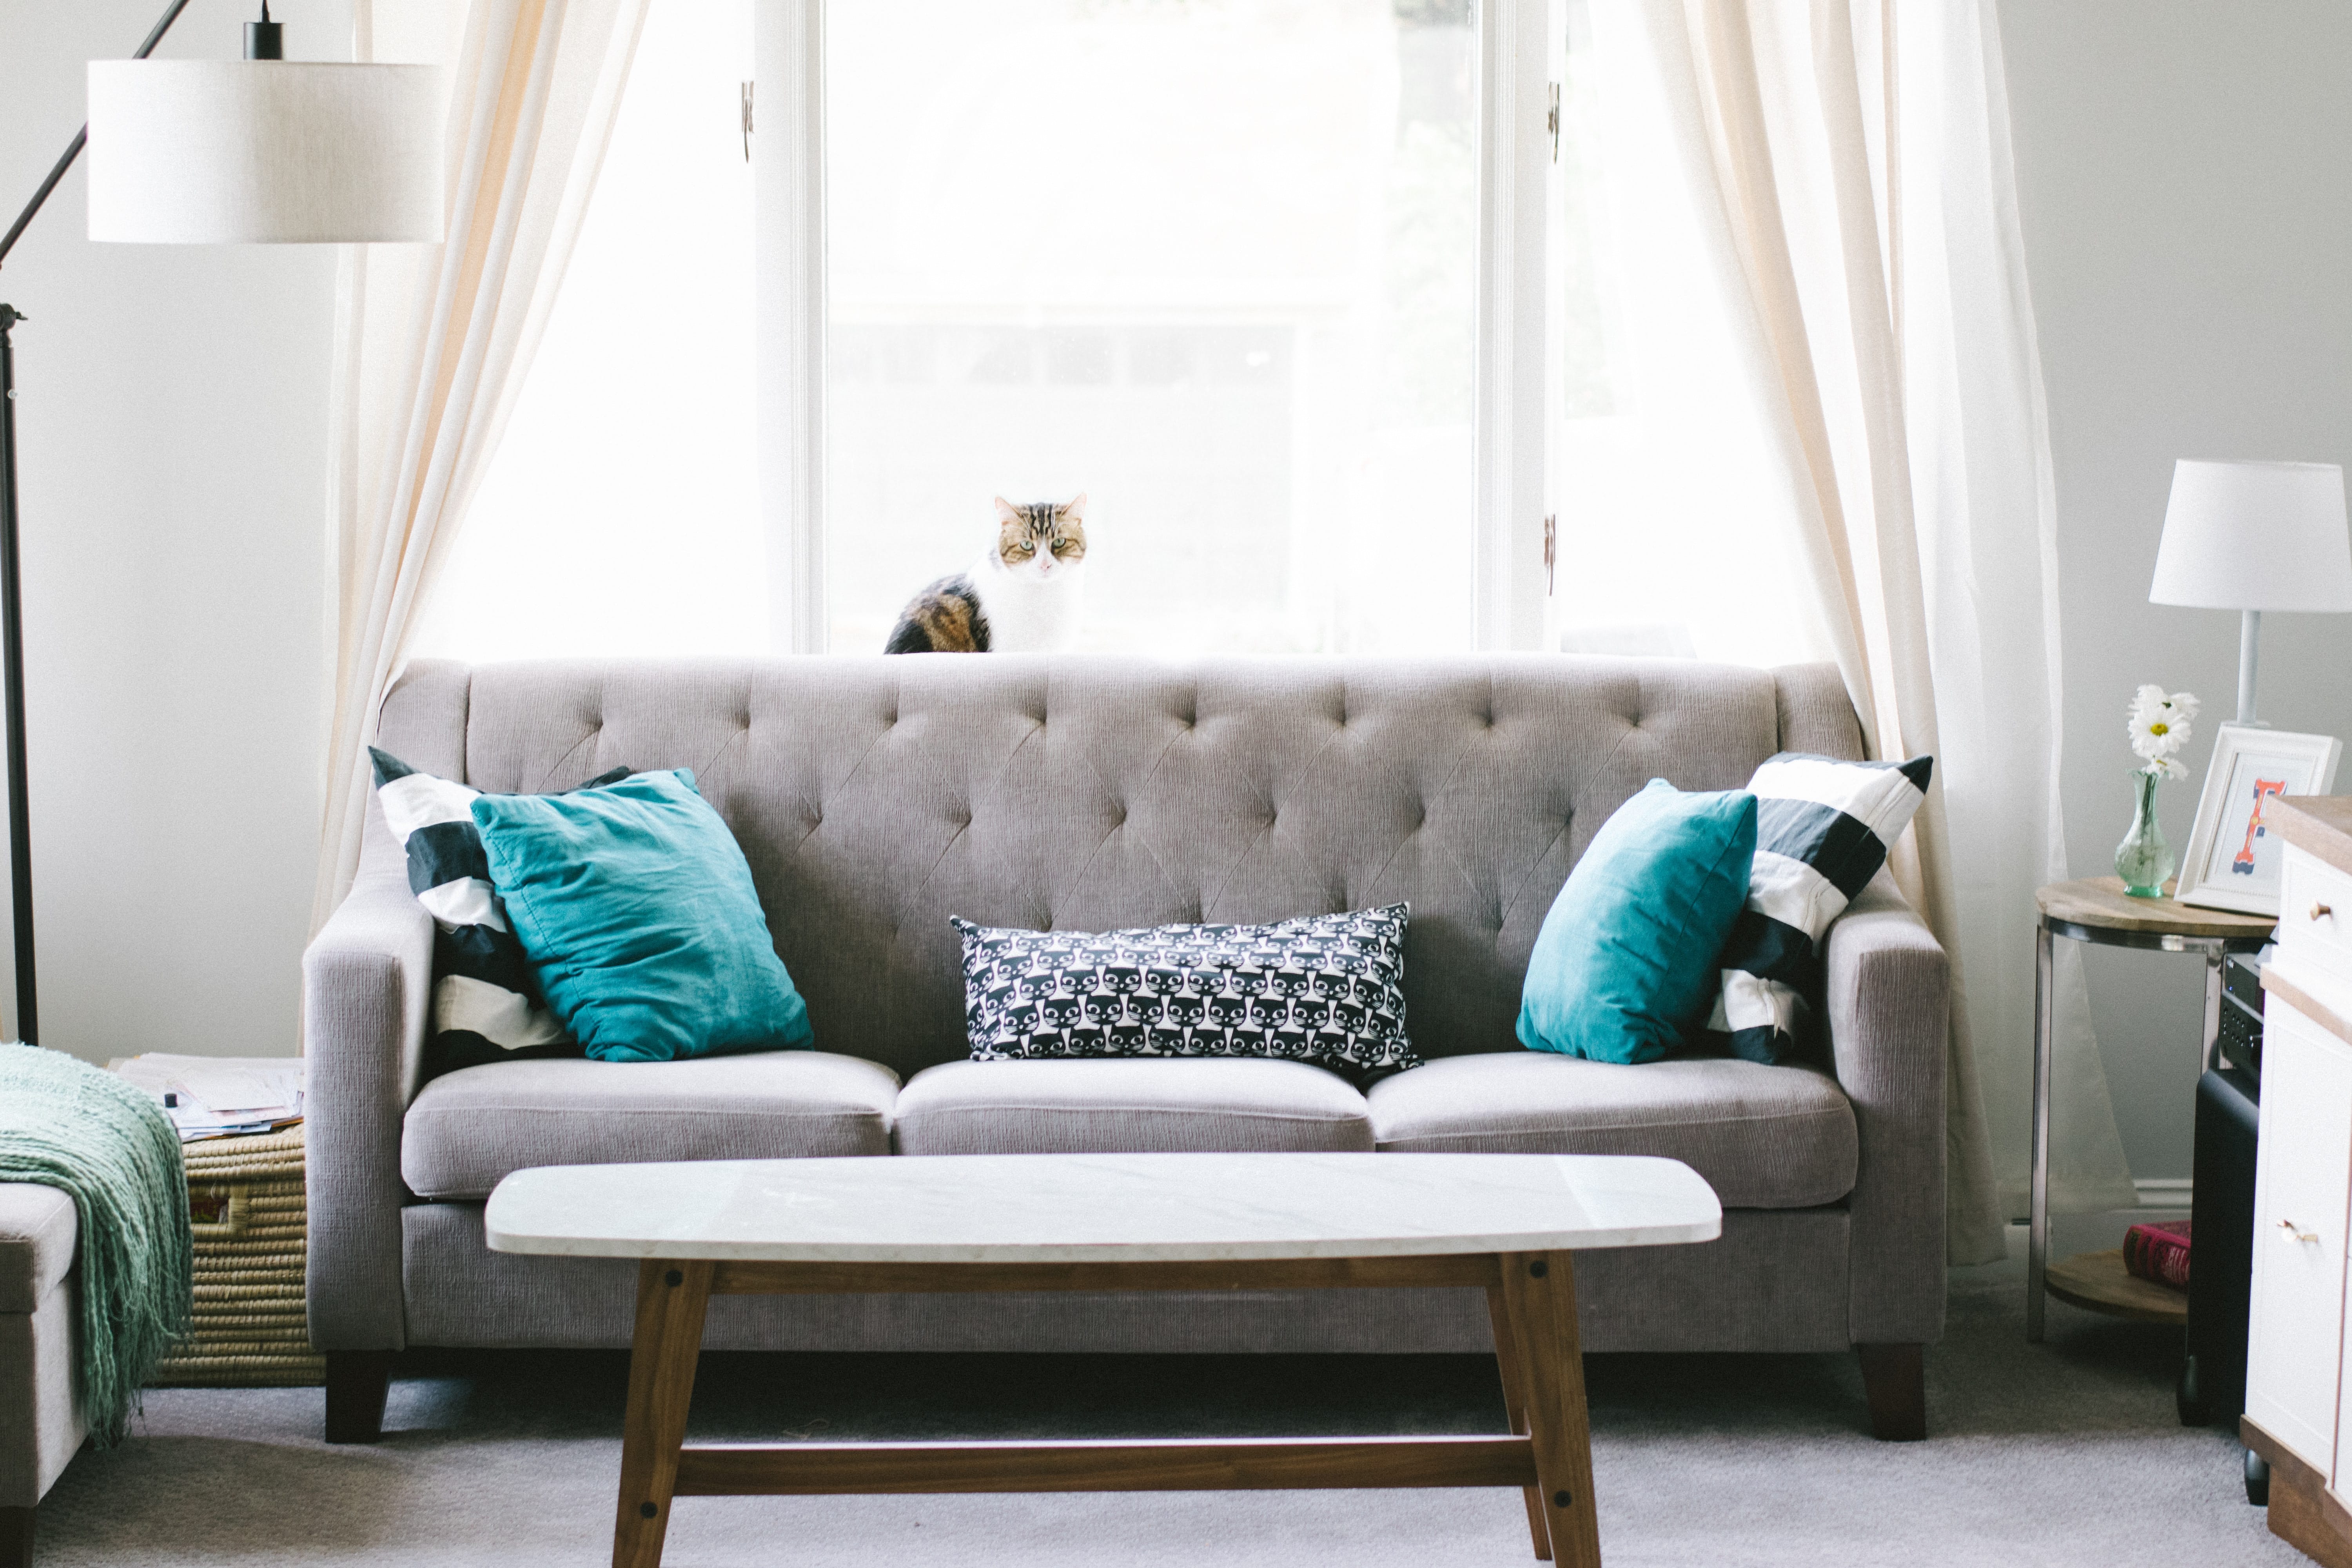 11 tips for making a home of your rented house